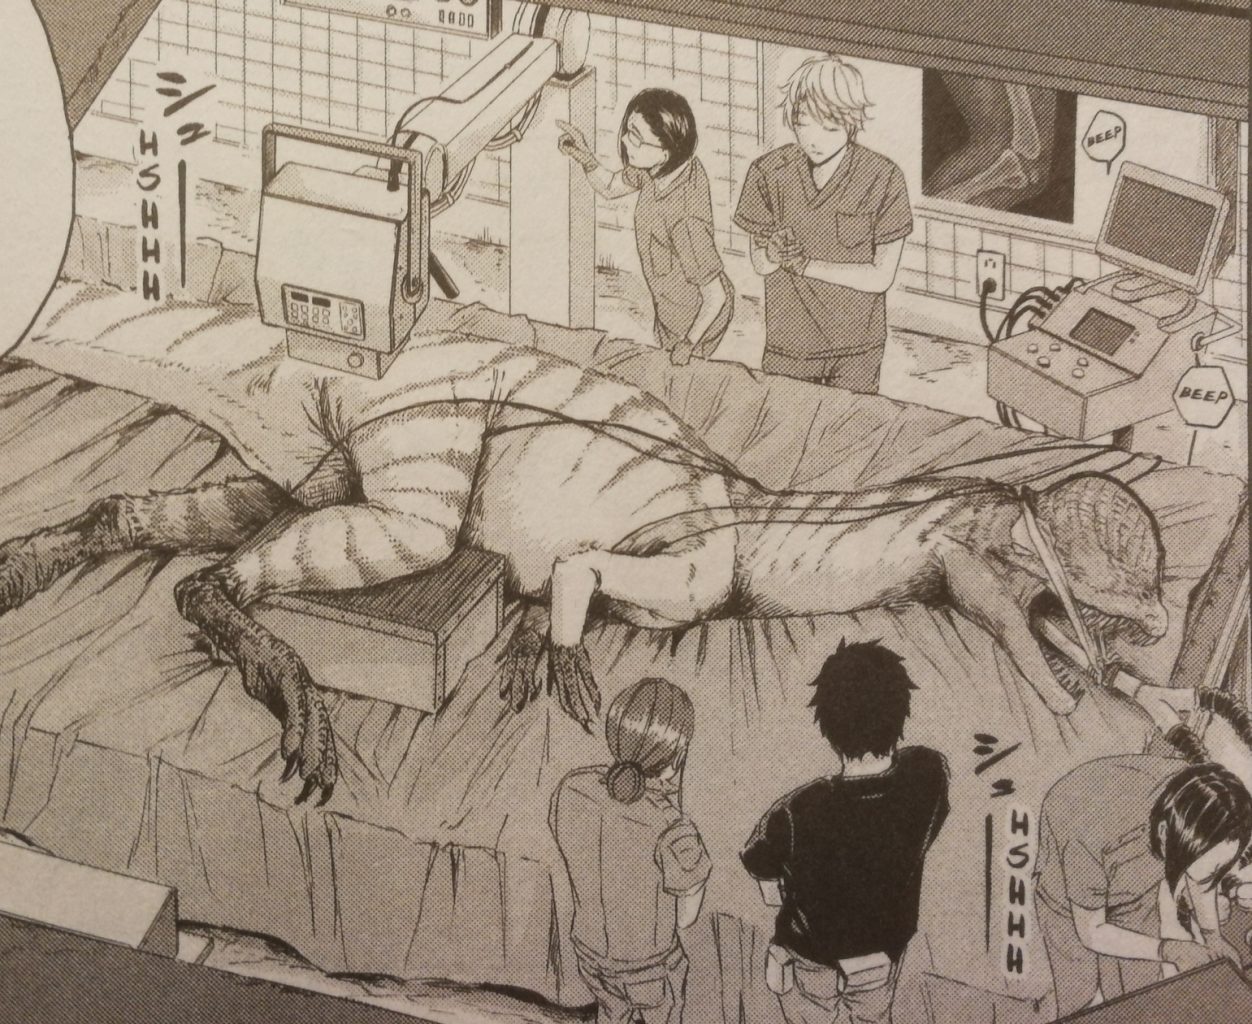 A large theropod dinosaur is stretched out on a surgical table as staff congregate around it.